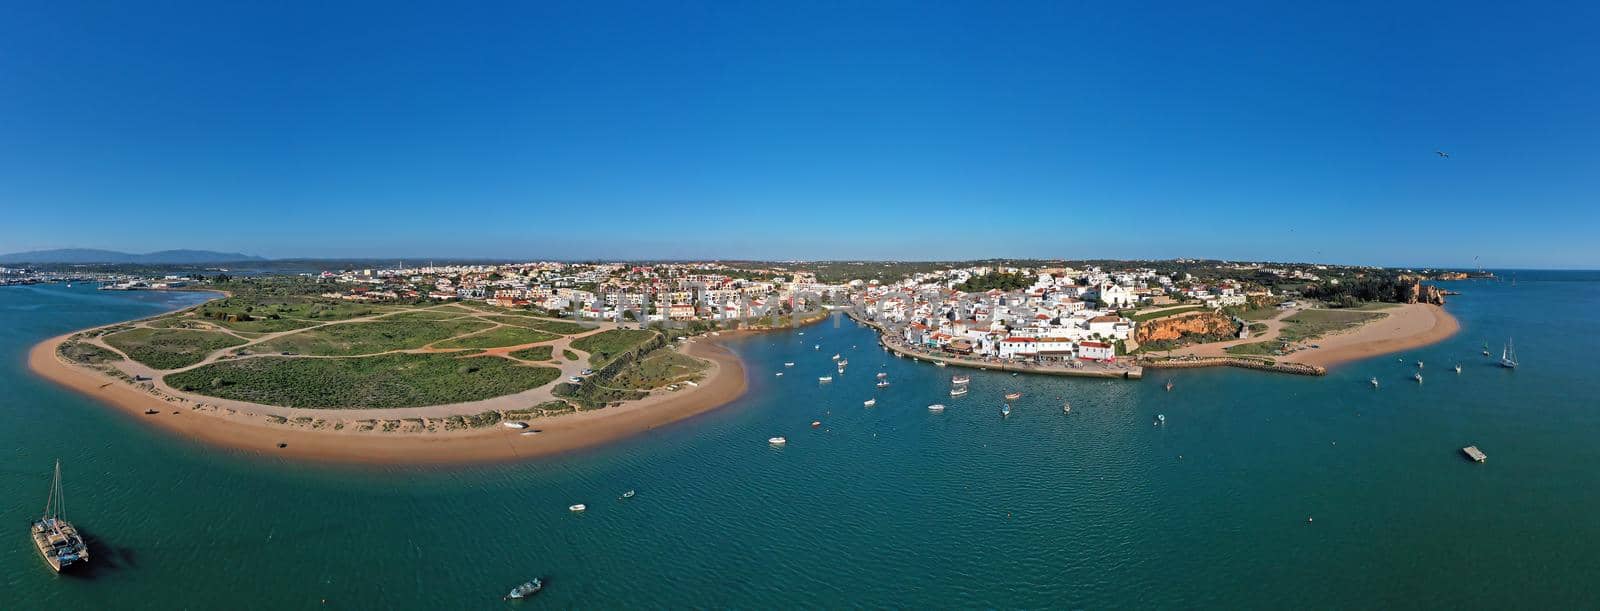 Aerial panorama from the village Ferragudo in the Algarve Portugal by devy